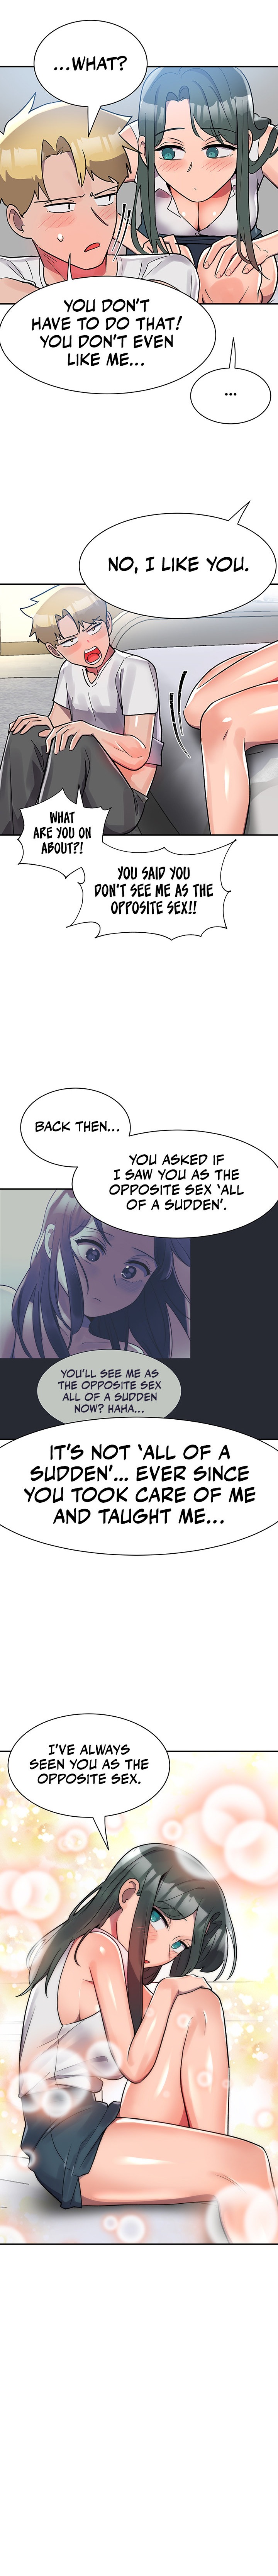 Relationship Reverse Button: Let’s Educate That Arrogant Girl - Chapter 8 Page 8